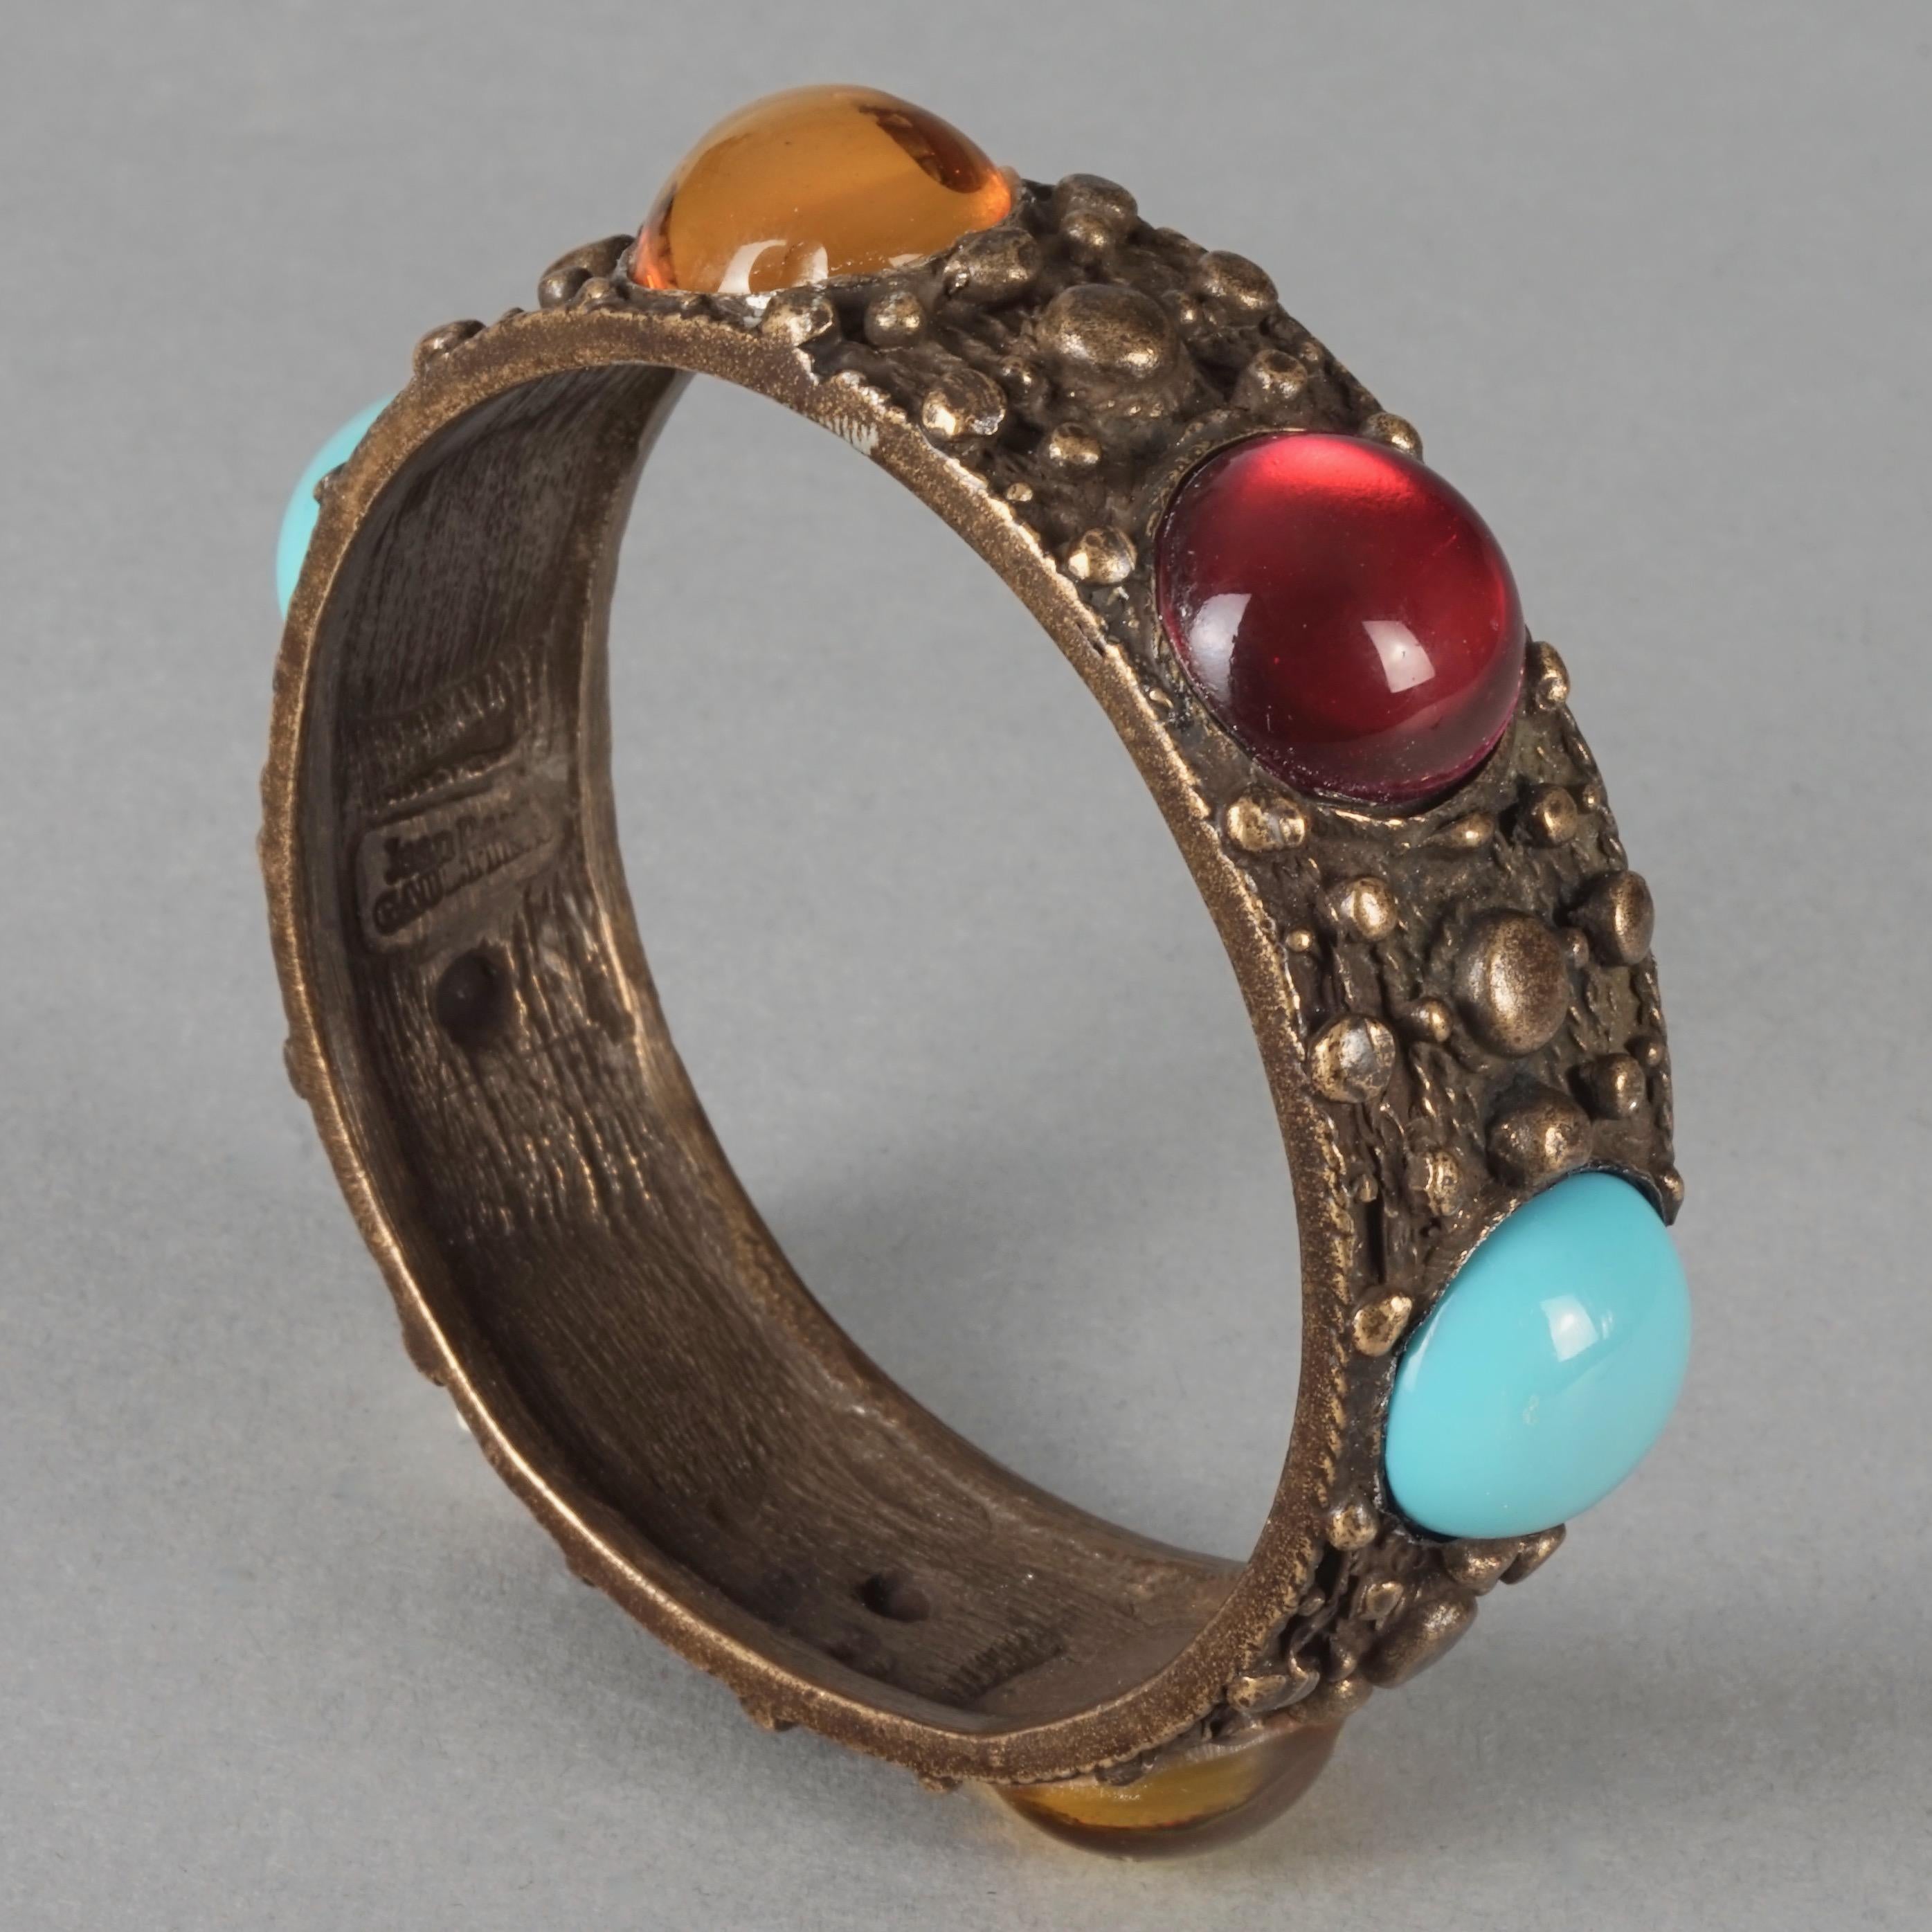 Vintage JEAN PAUL GAULTIER Ethnic Glass Cabochons Cuff Bracelet In Excellent Condition For Sale In Kingersheim, Alsace